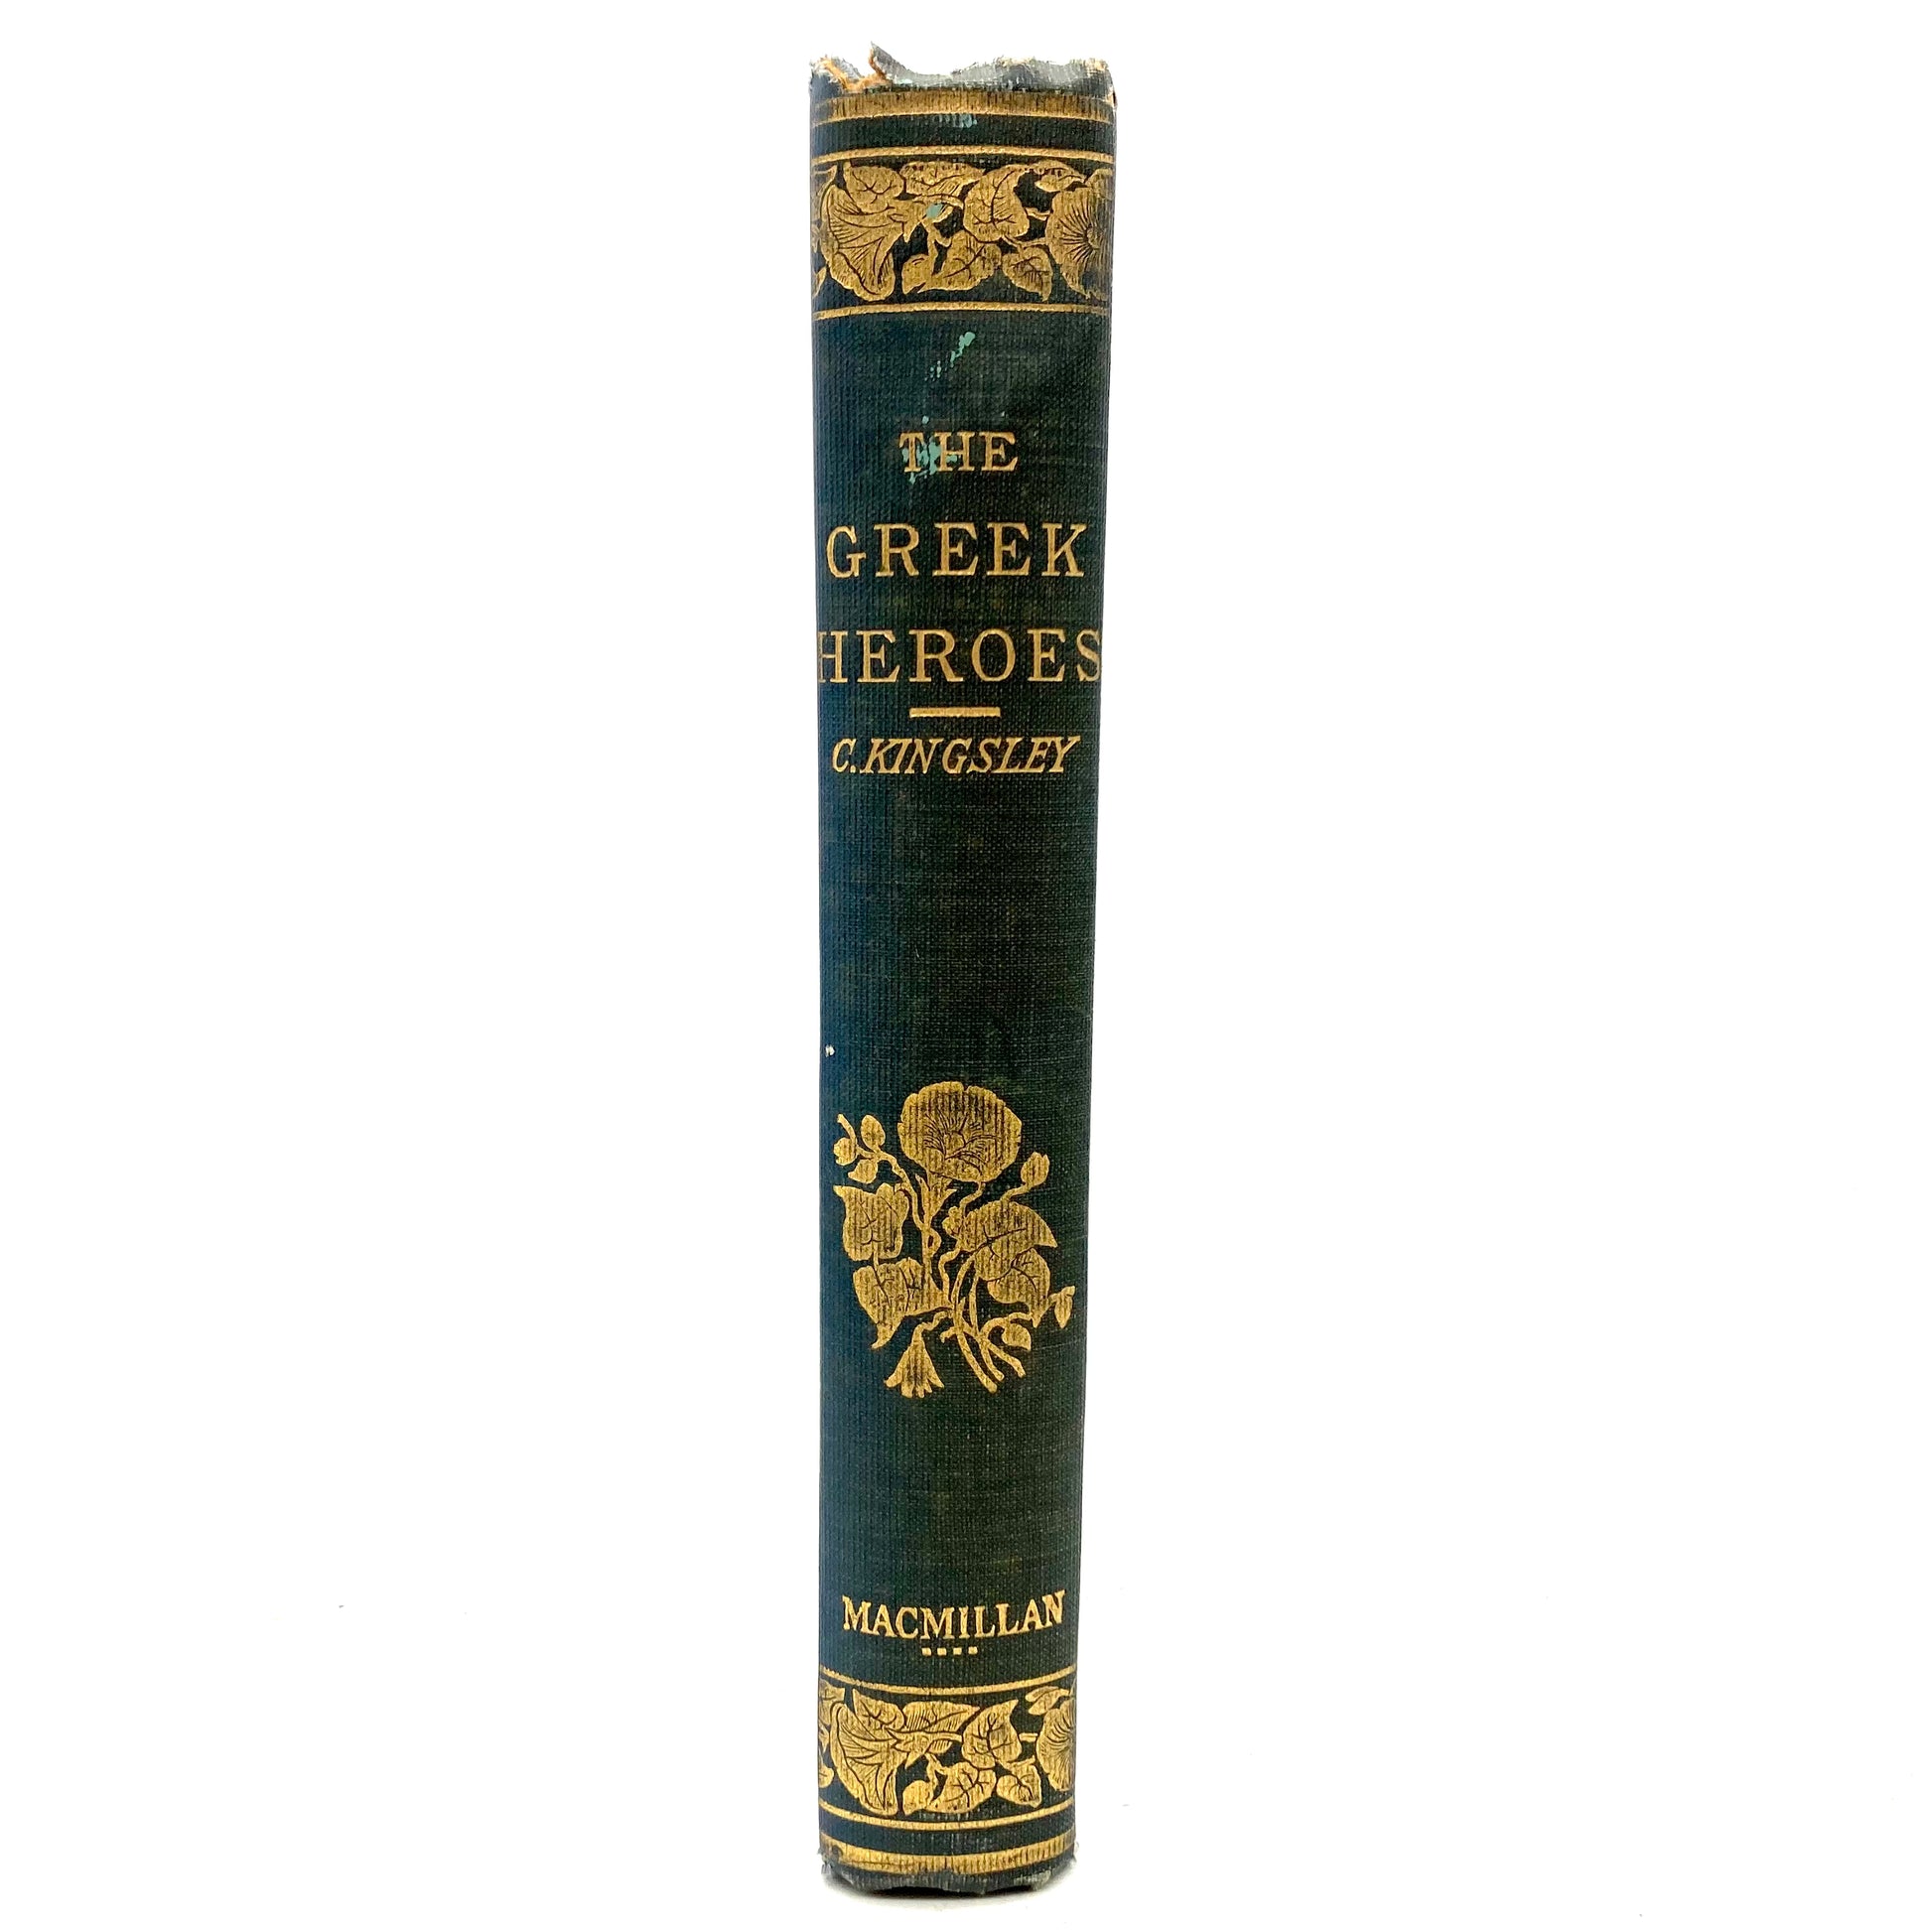 KINGSLEY, Charles "The Heroes; or Greek Fairy Tales For My Children" [The Macmillan Company, 1928] - Buzz Bookstore